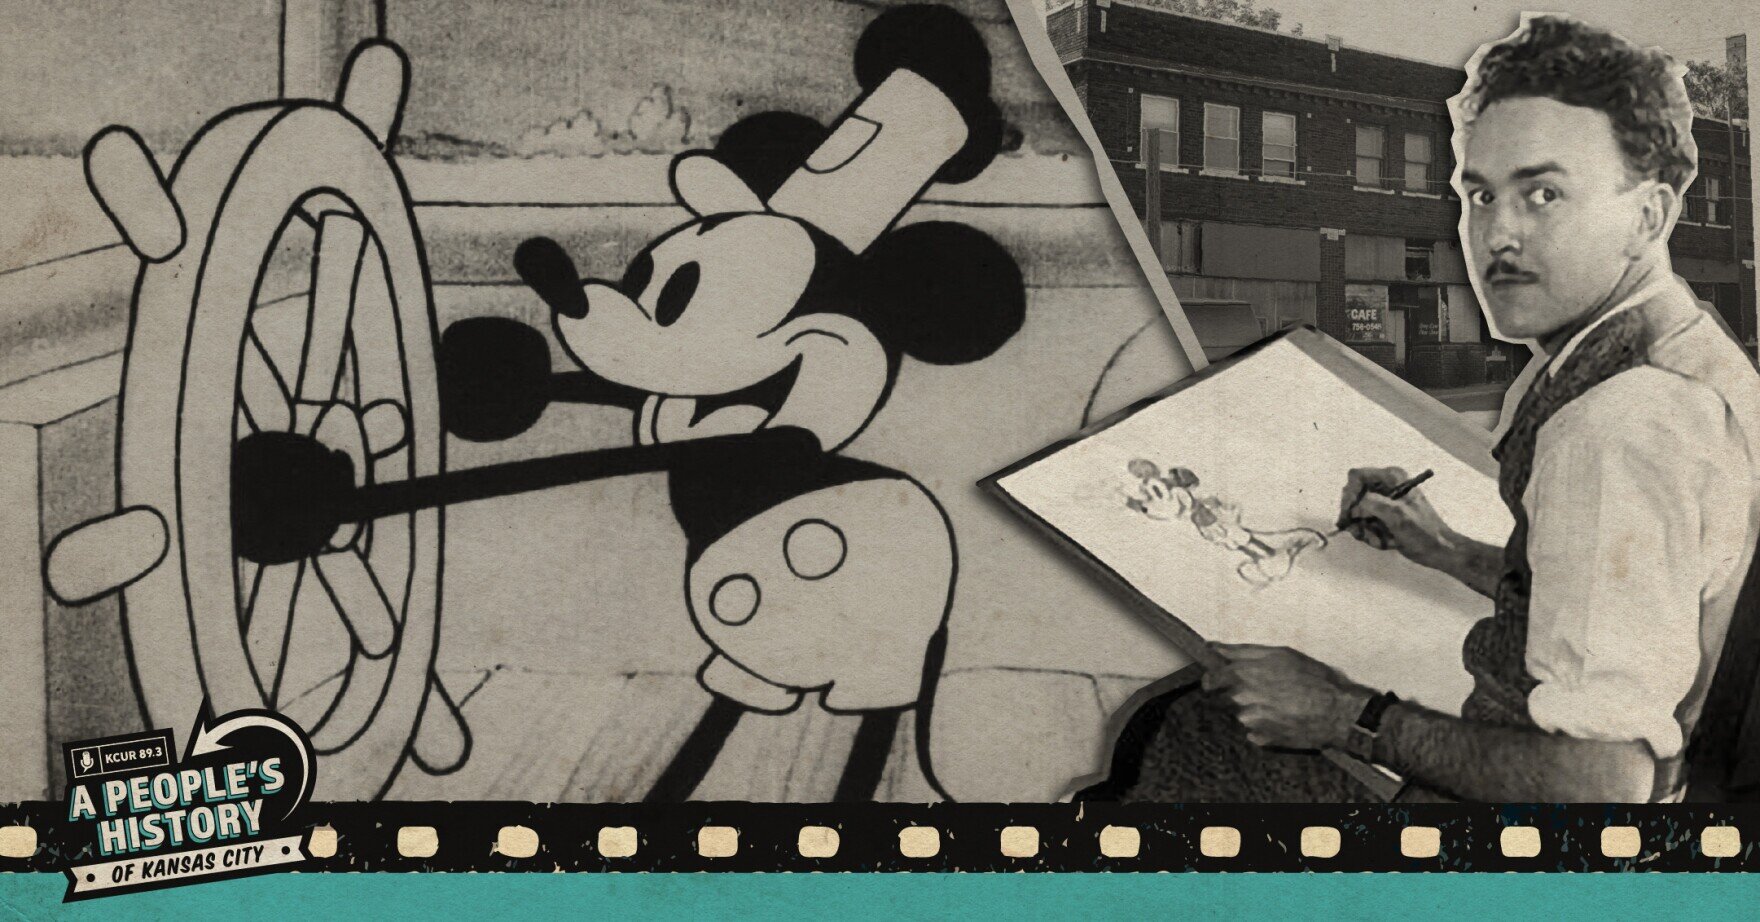 8 Interesting Facts About Mickey Mouse